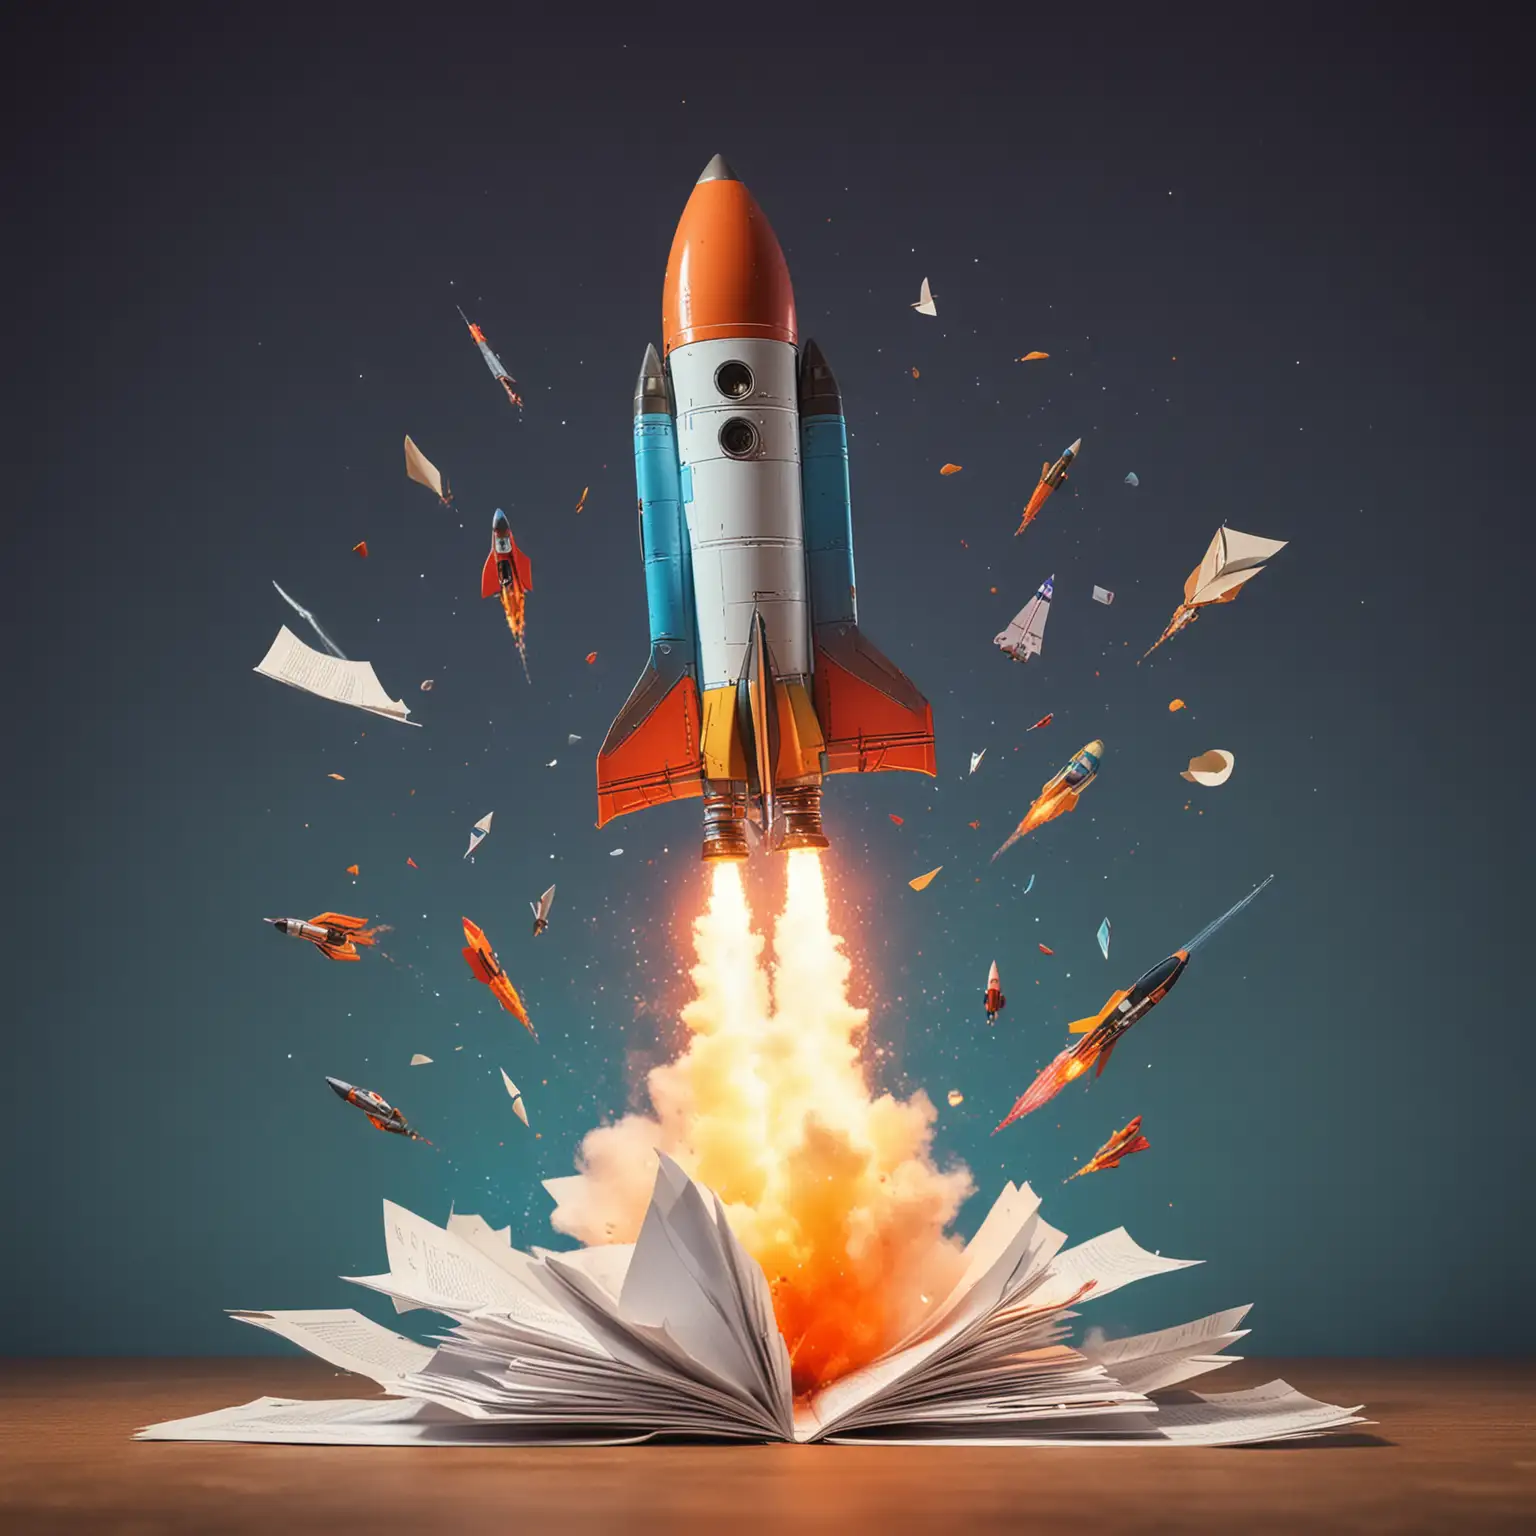 Rocket Ship Launching with Documents Flying Vibrant Cartoon Style